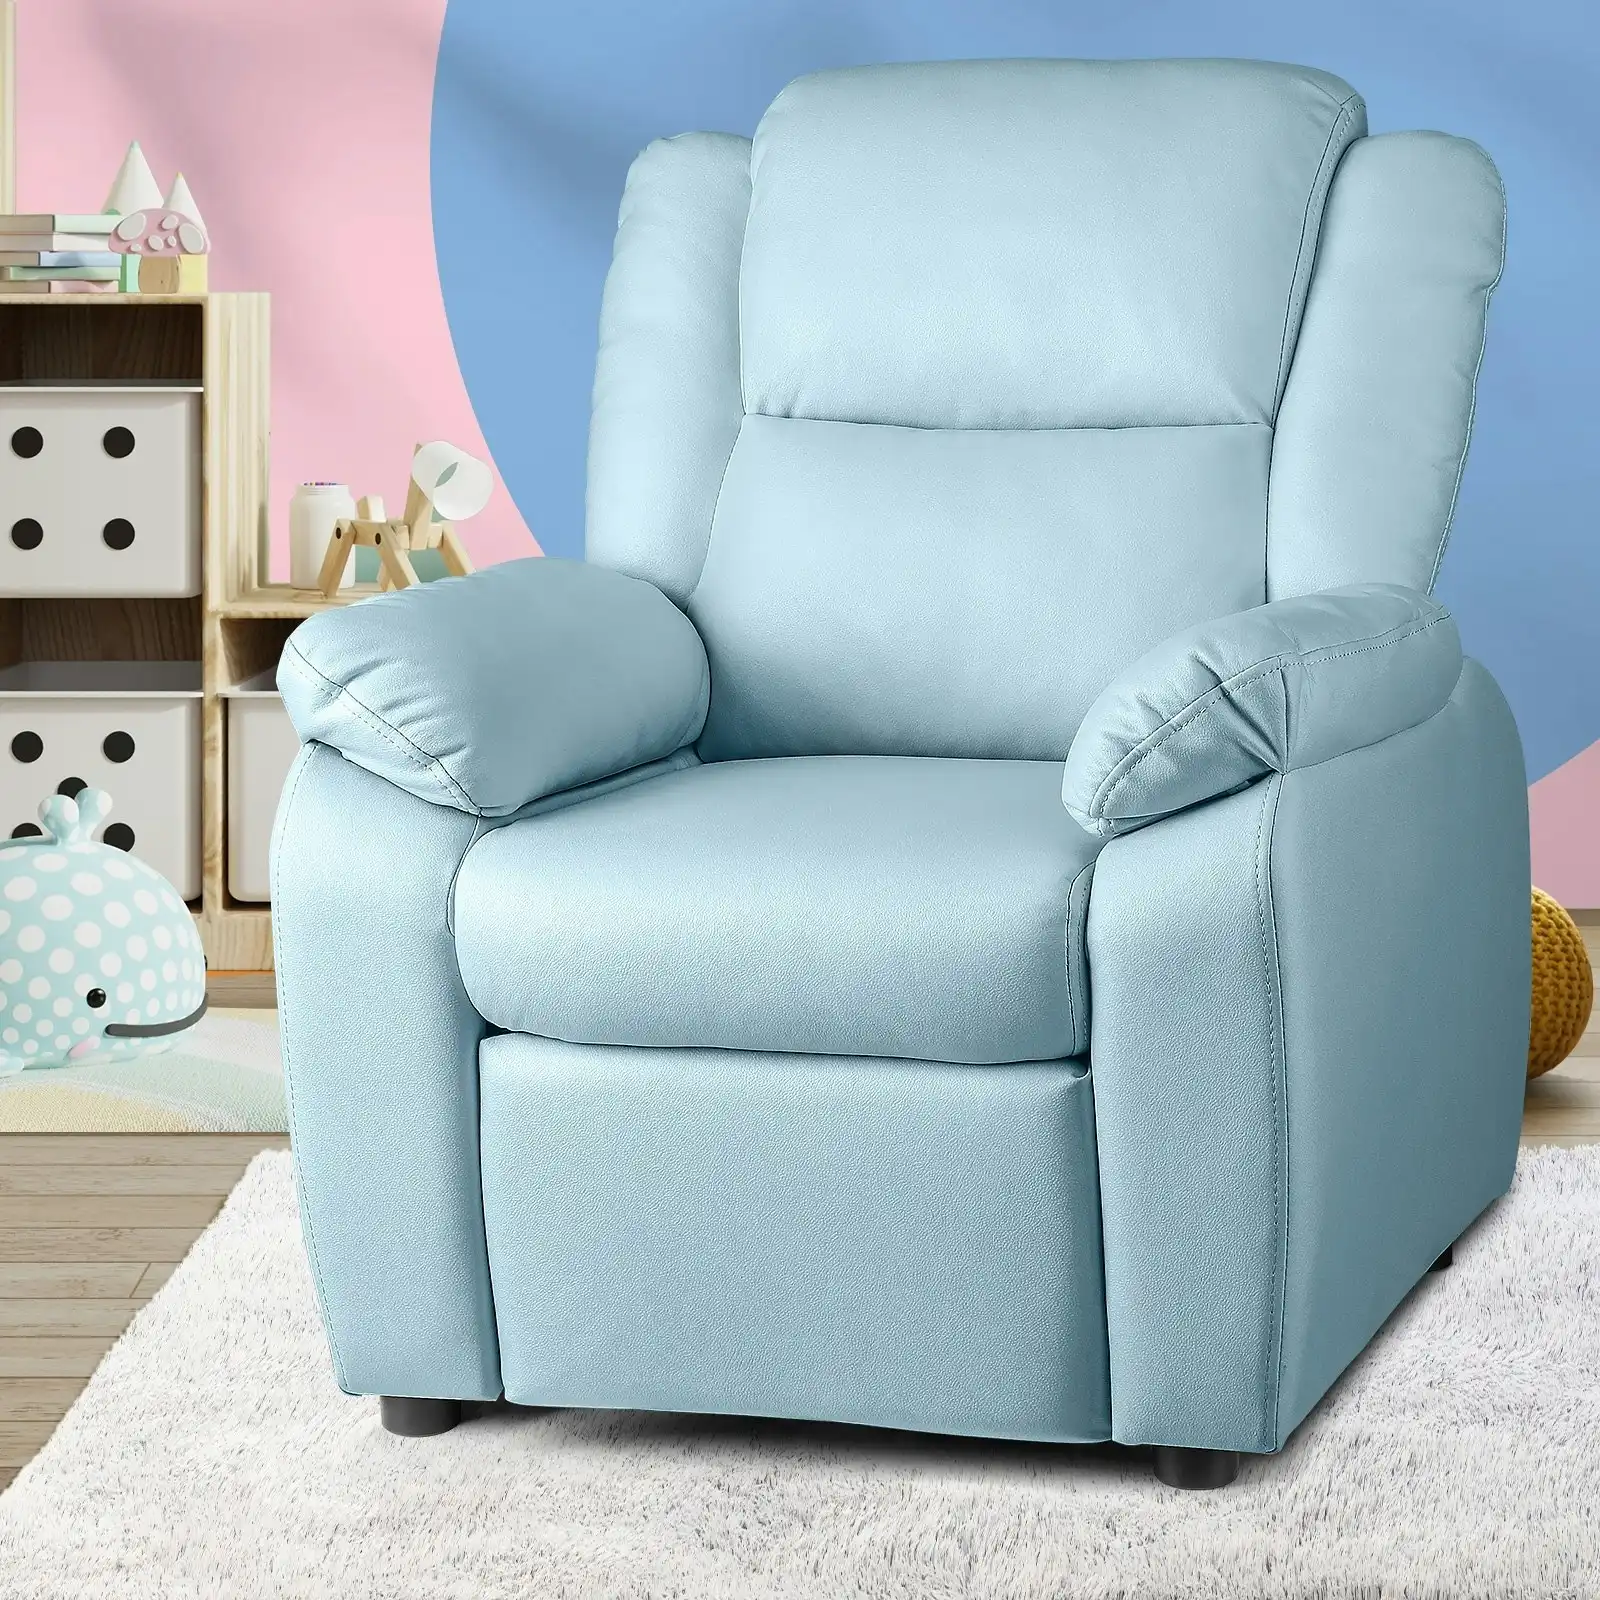 Oikiture Kids Recliner Children Lounge Chairs Engineered Fabric Couch Armchair